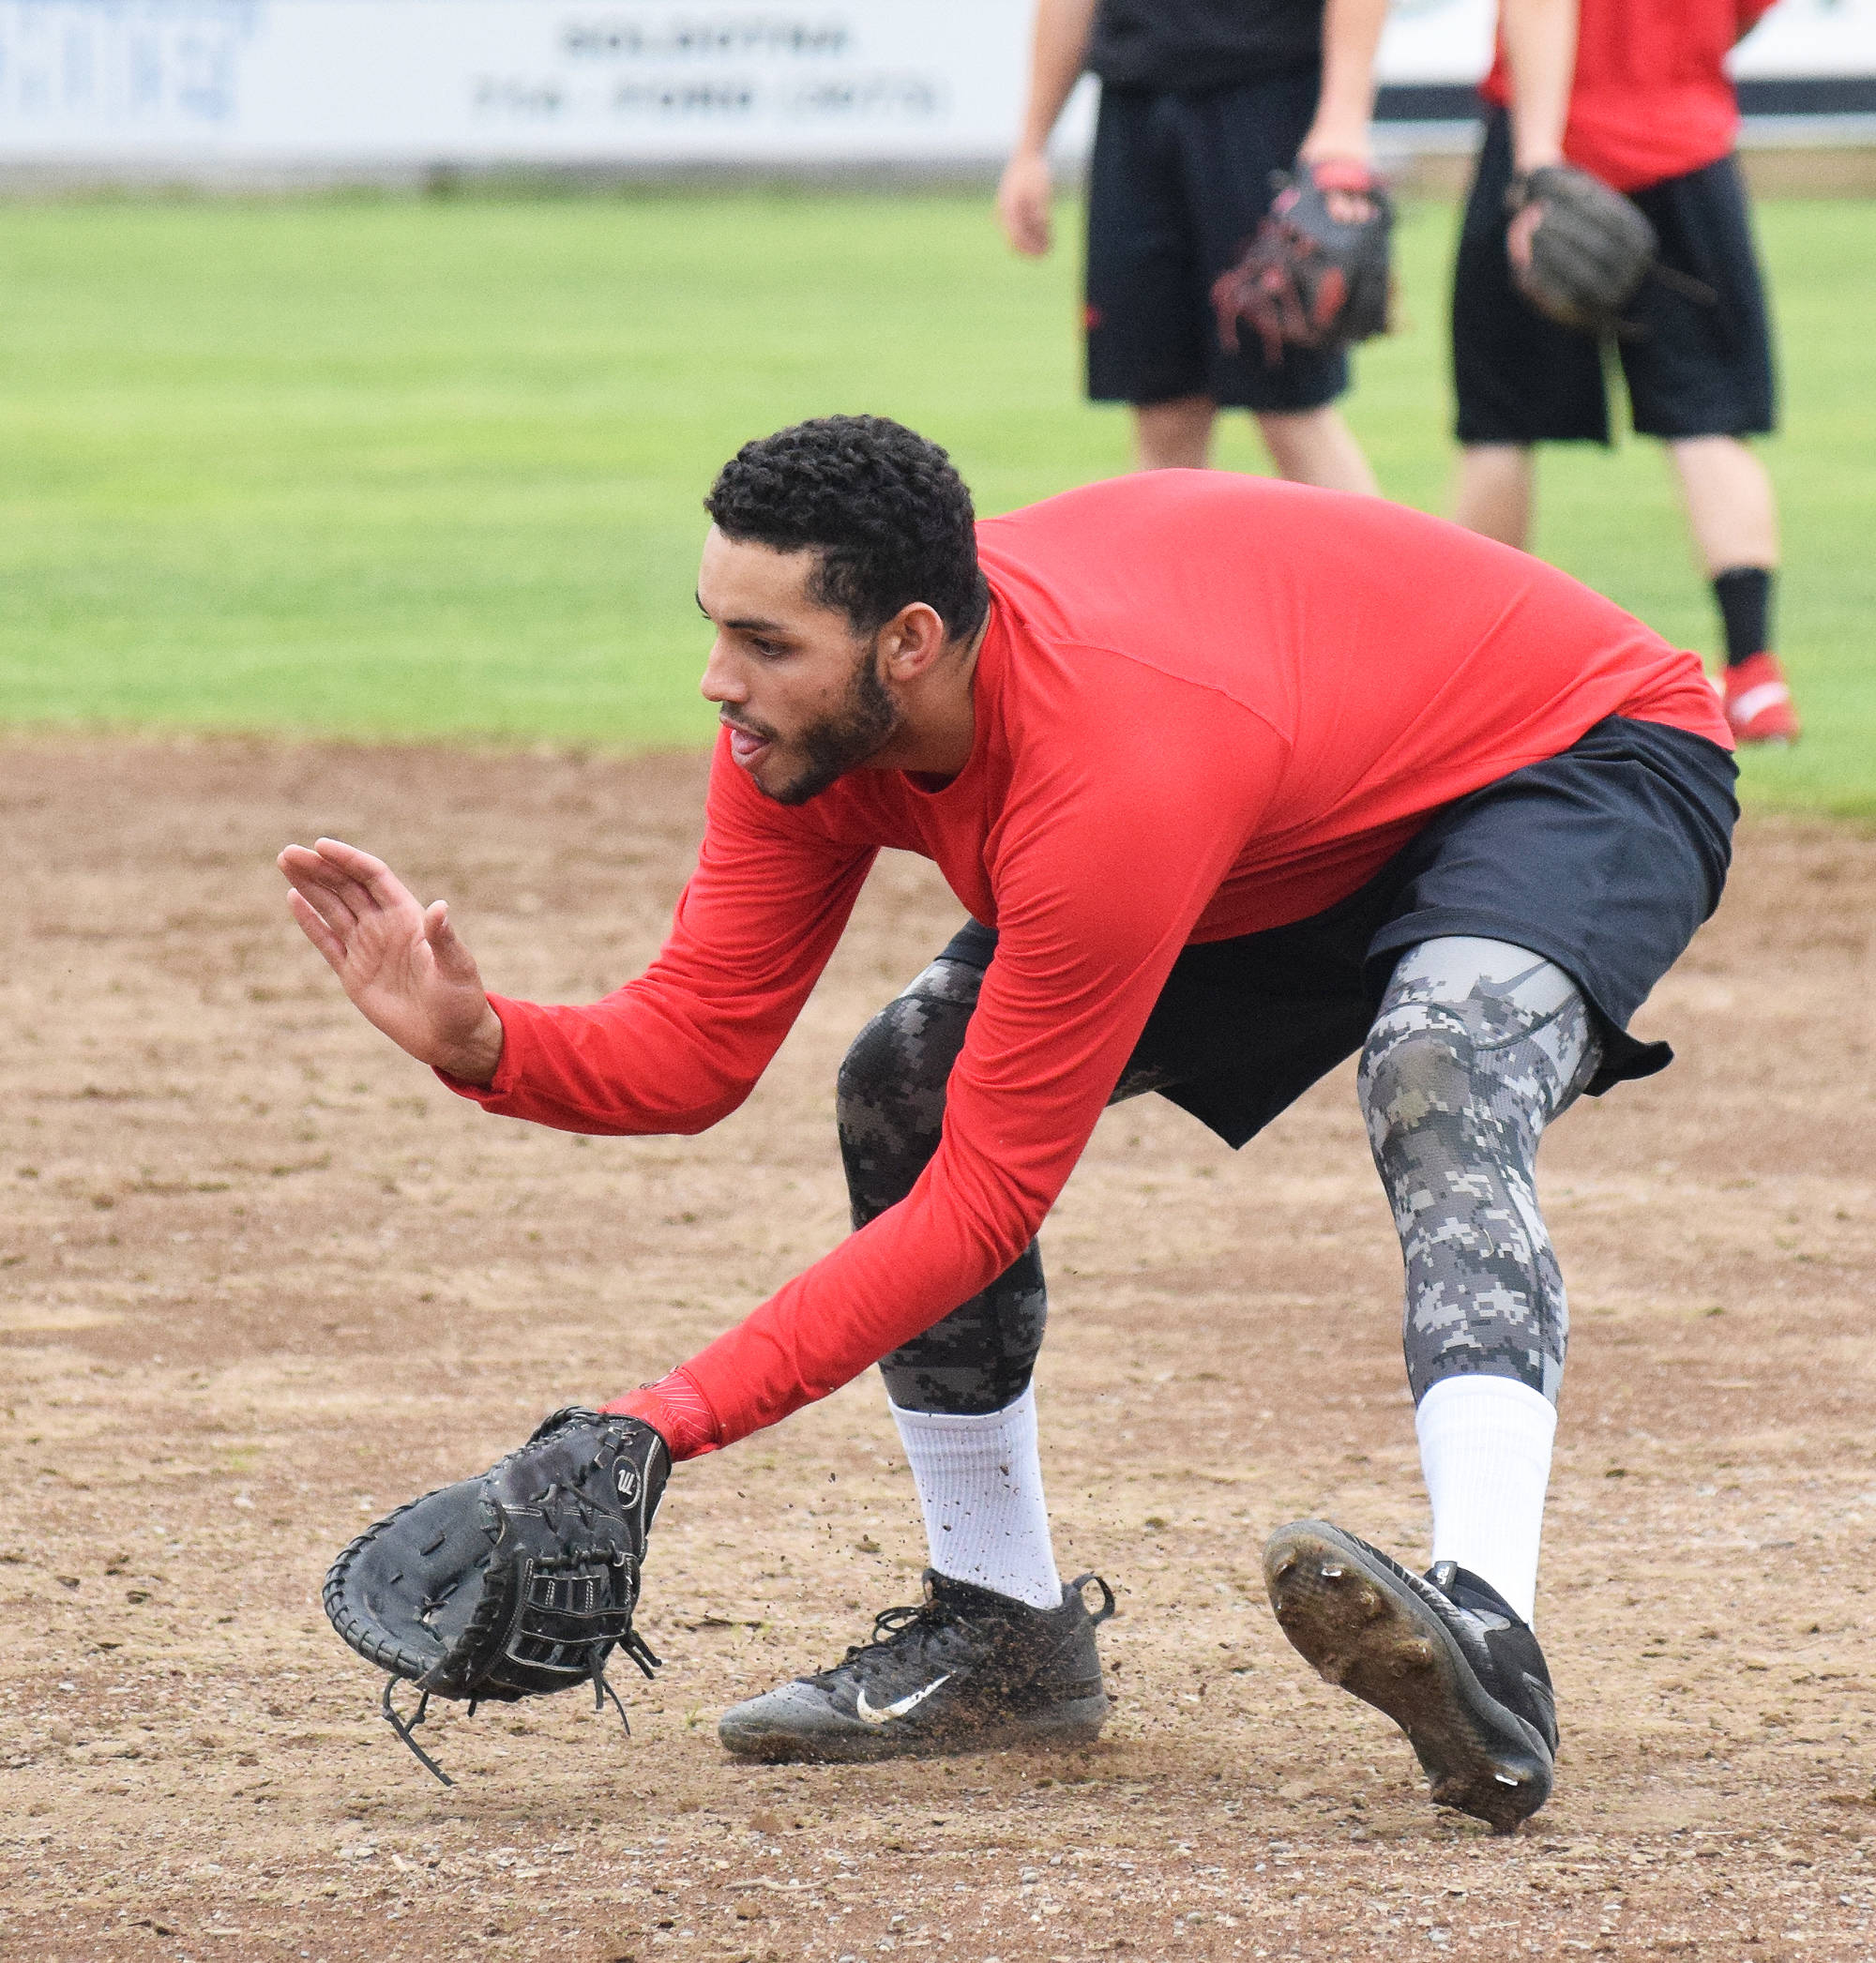 Peninsula Oilers infielder Jonathan Vizcaino scoops up a ground ball during batting practice Thursday in preparation of Friday’s season opener. (Photo by Joey Klecka/Peninsula Clarion)